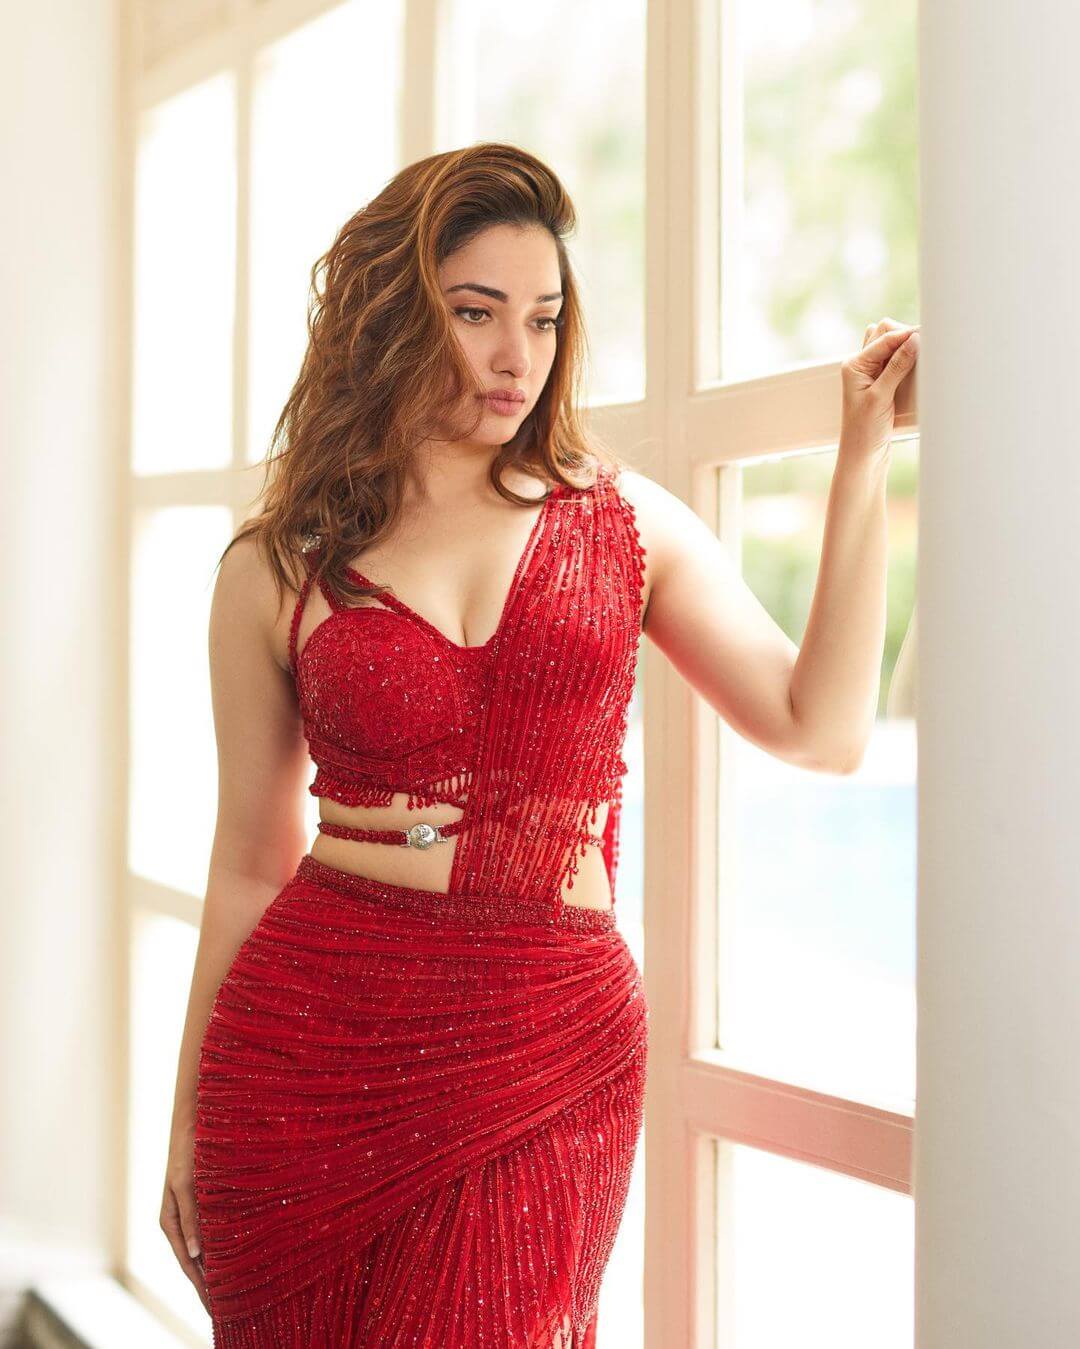 Tamannaah Bhatia Continues To Blaze The Web In Her Fab Fringe Sari: We are obsessed with the wrapped pure fringe sari. Photo Credit: www.instagram.com